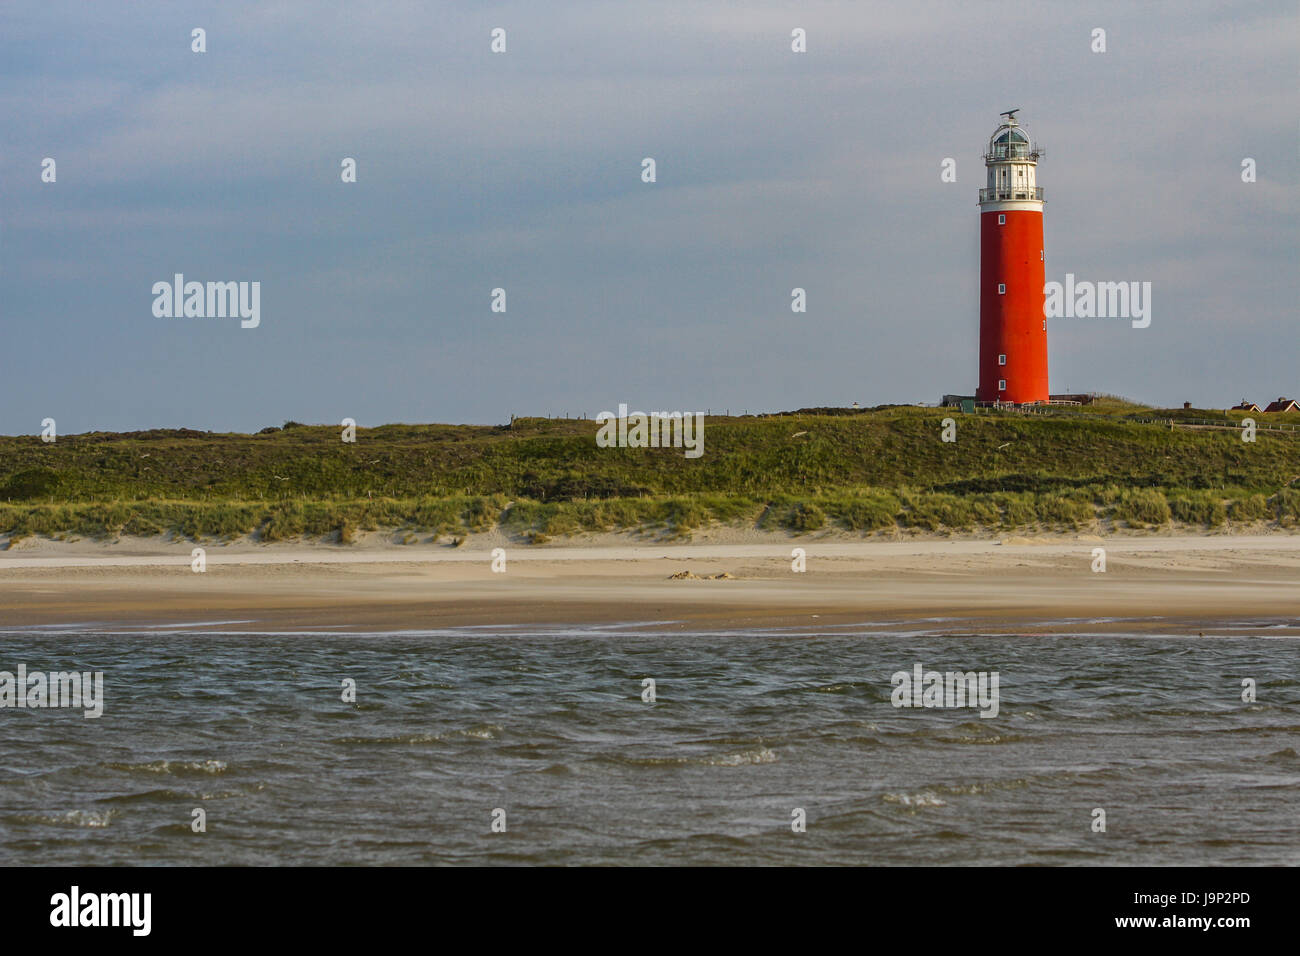 Phare Eierland, Texel, Pays-Bas Banque D'Images